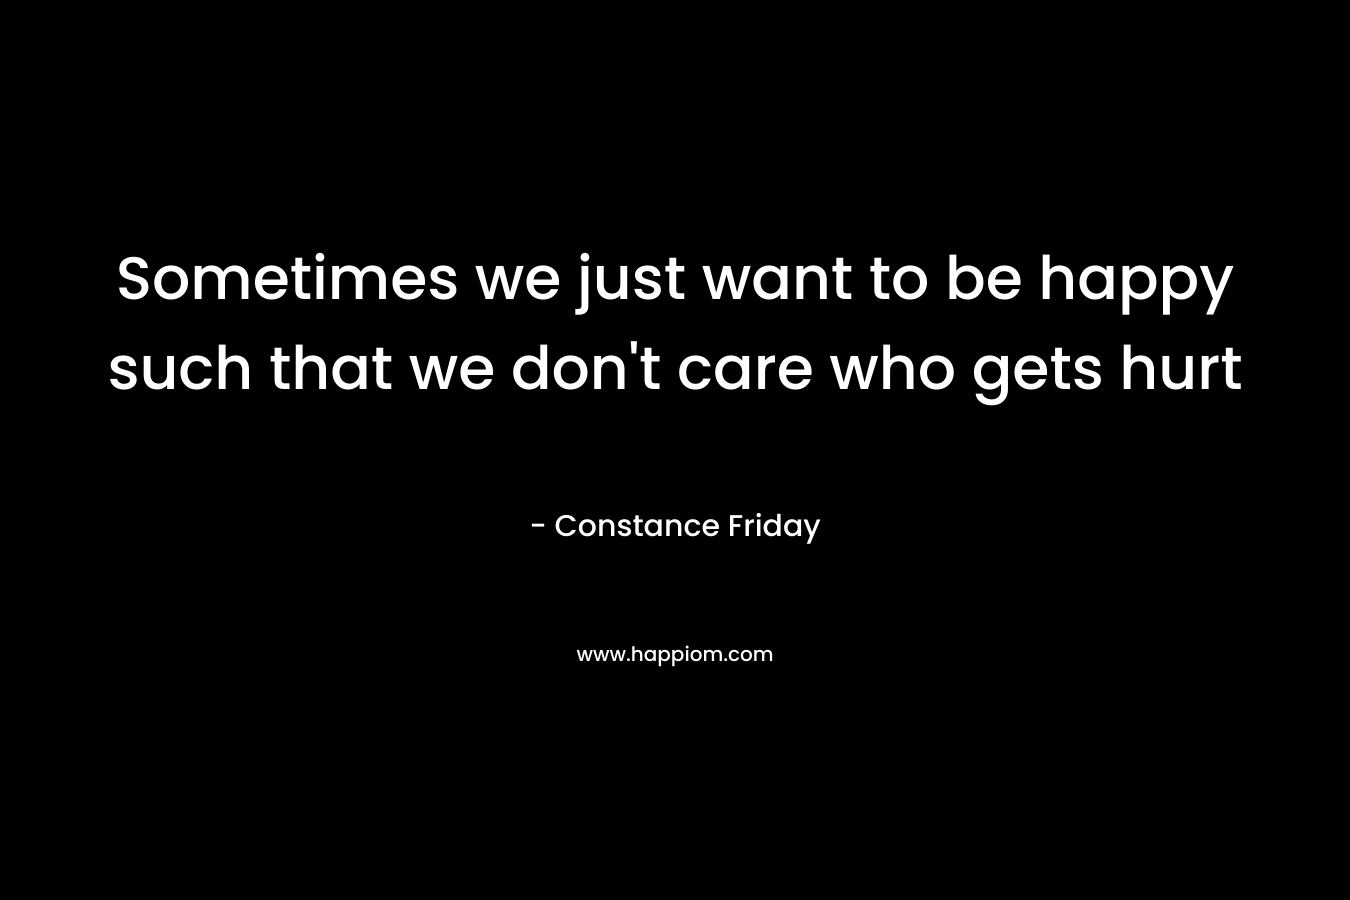 Sometimes we just want to be happy such that we don't care who gets hurt